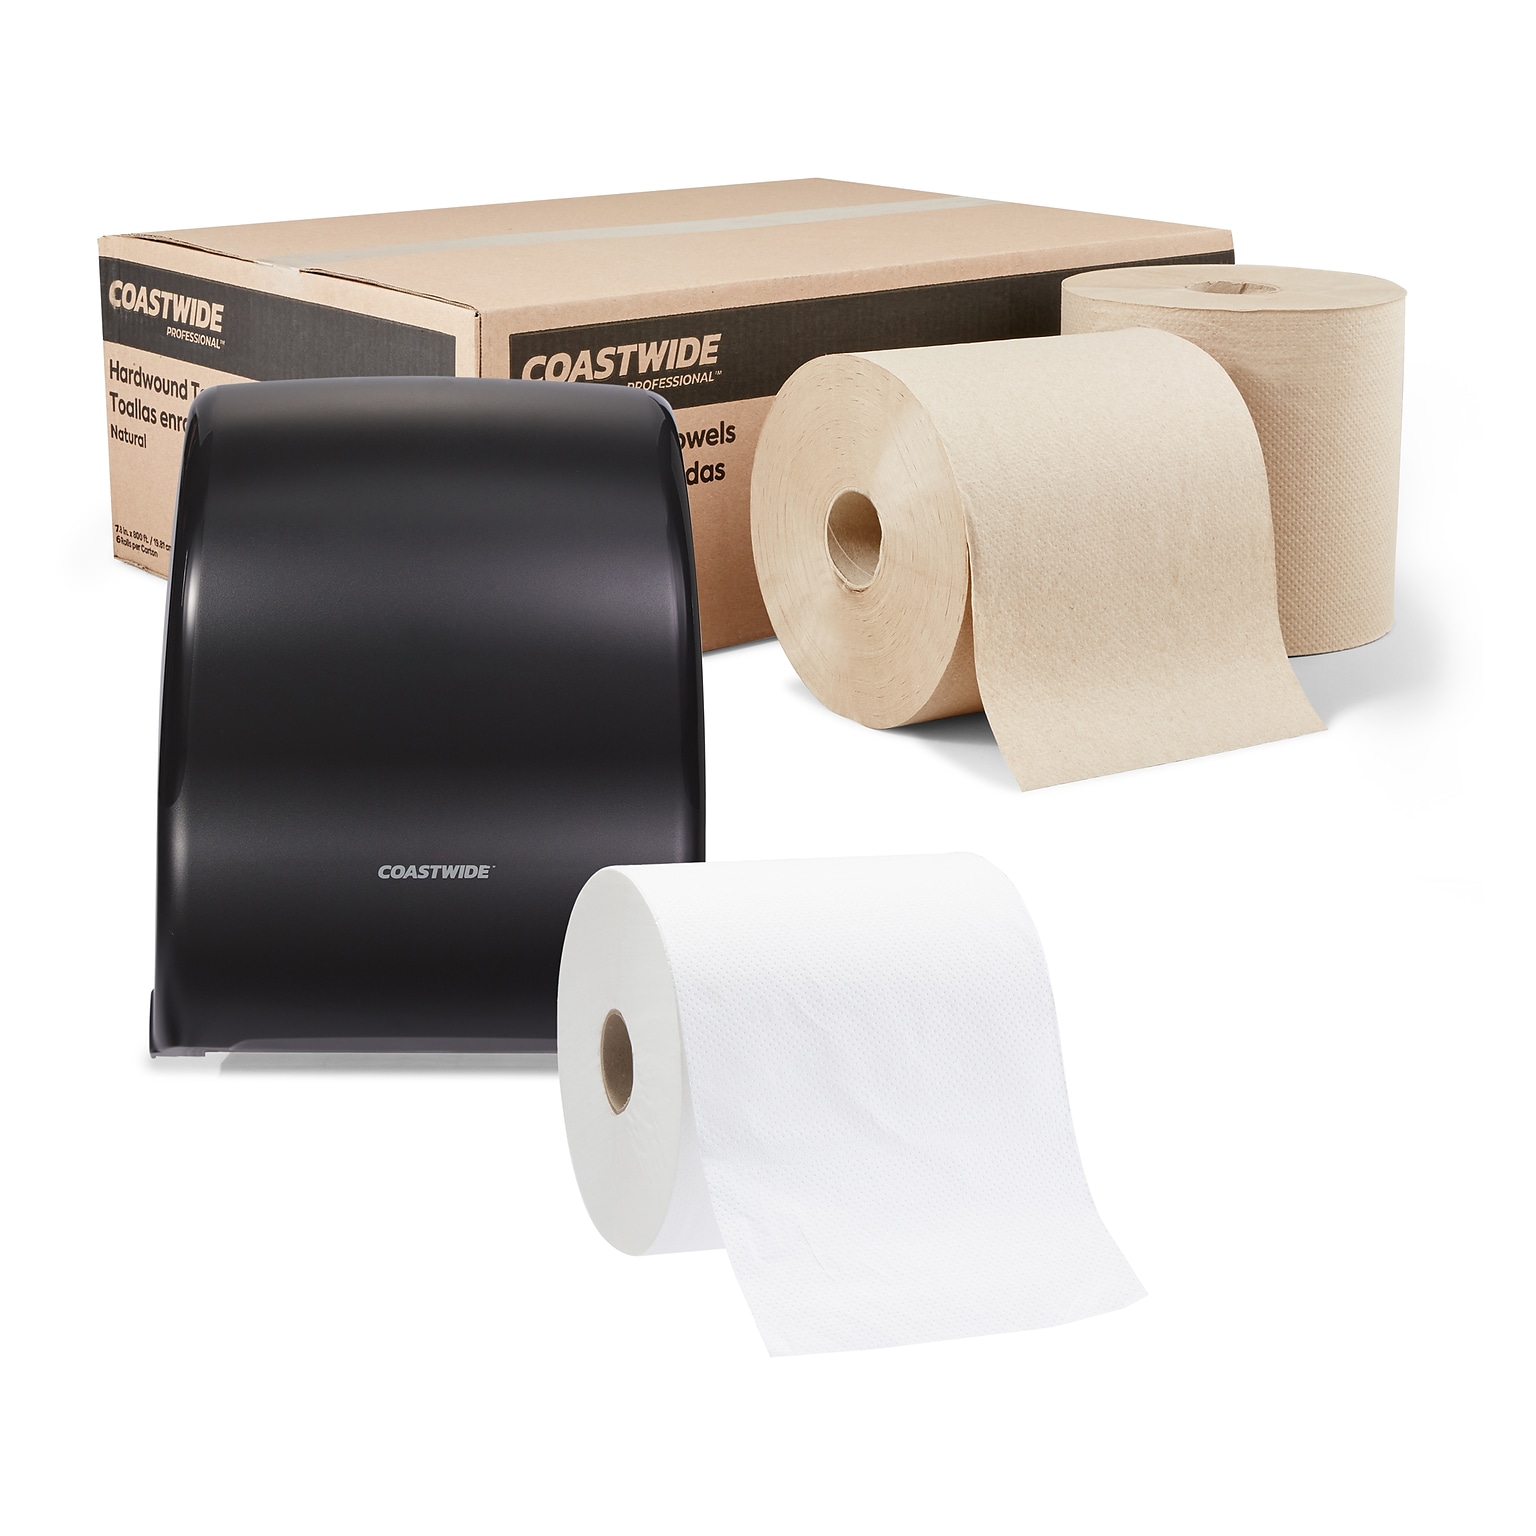 Free Coastwide Hardwound Paper Towel Dispenser when you Purchase One Coastwide Refill